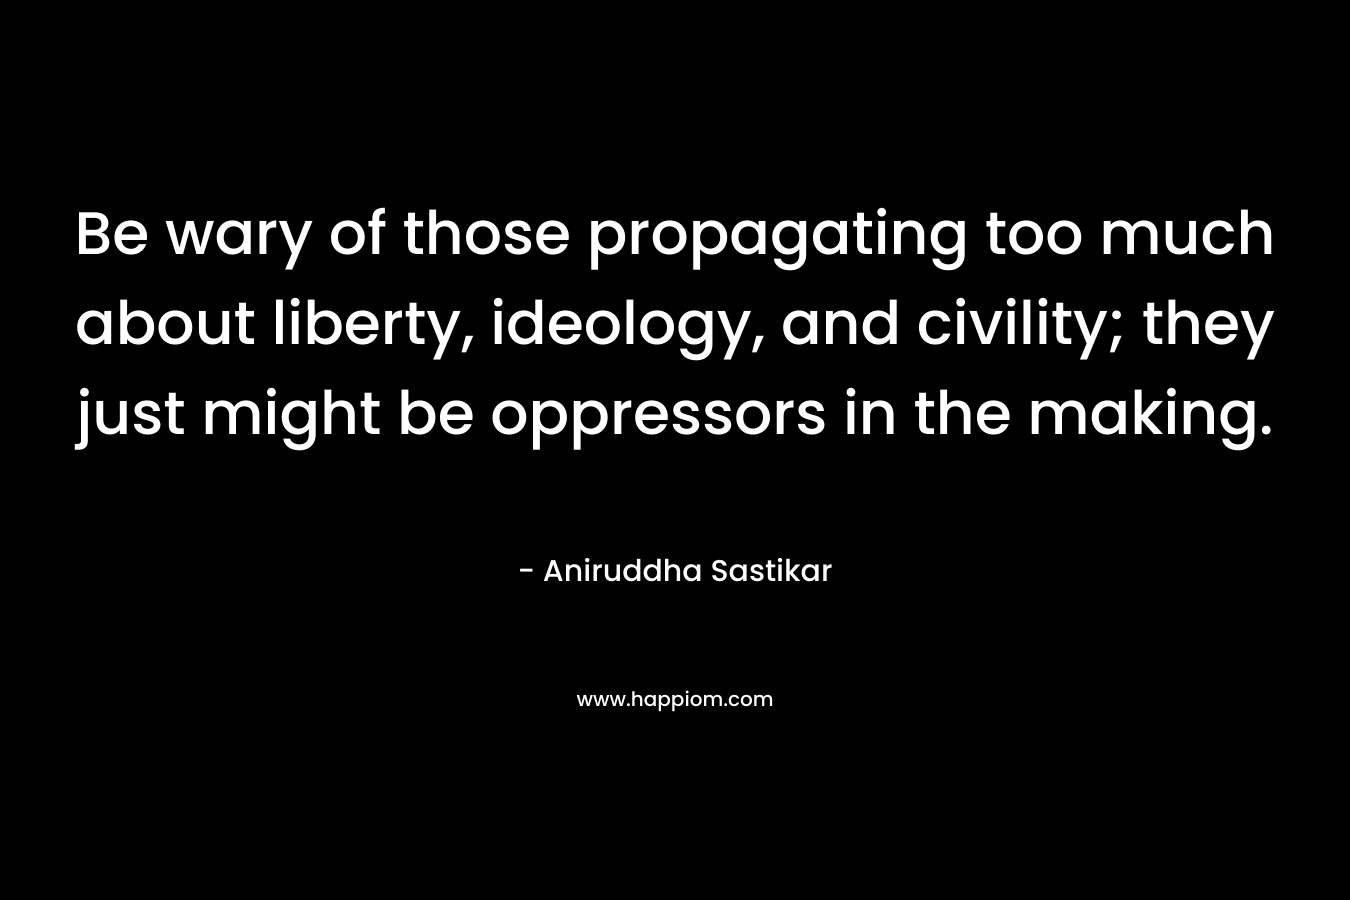 Be wary of those propagating too much about liberty, ideology, and civility; they just might be oppressors in the making. – Aniruddha Sastikar